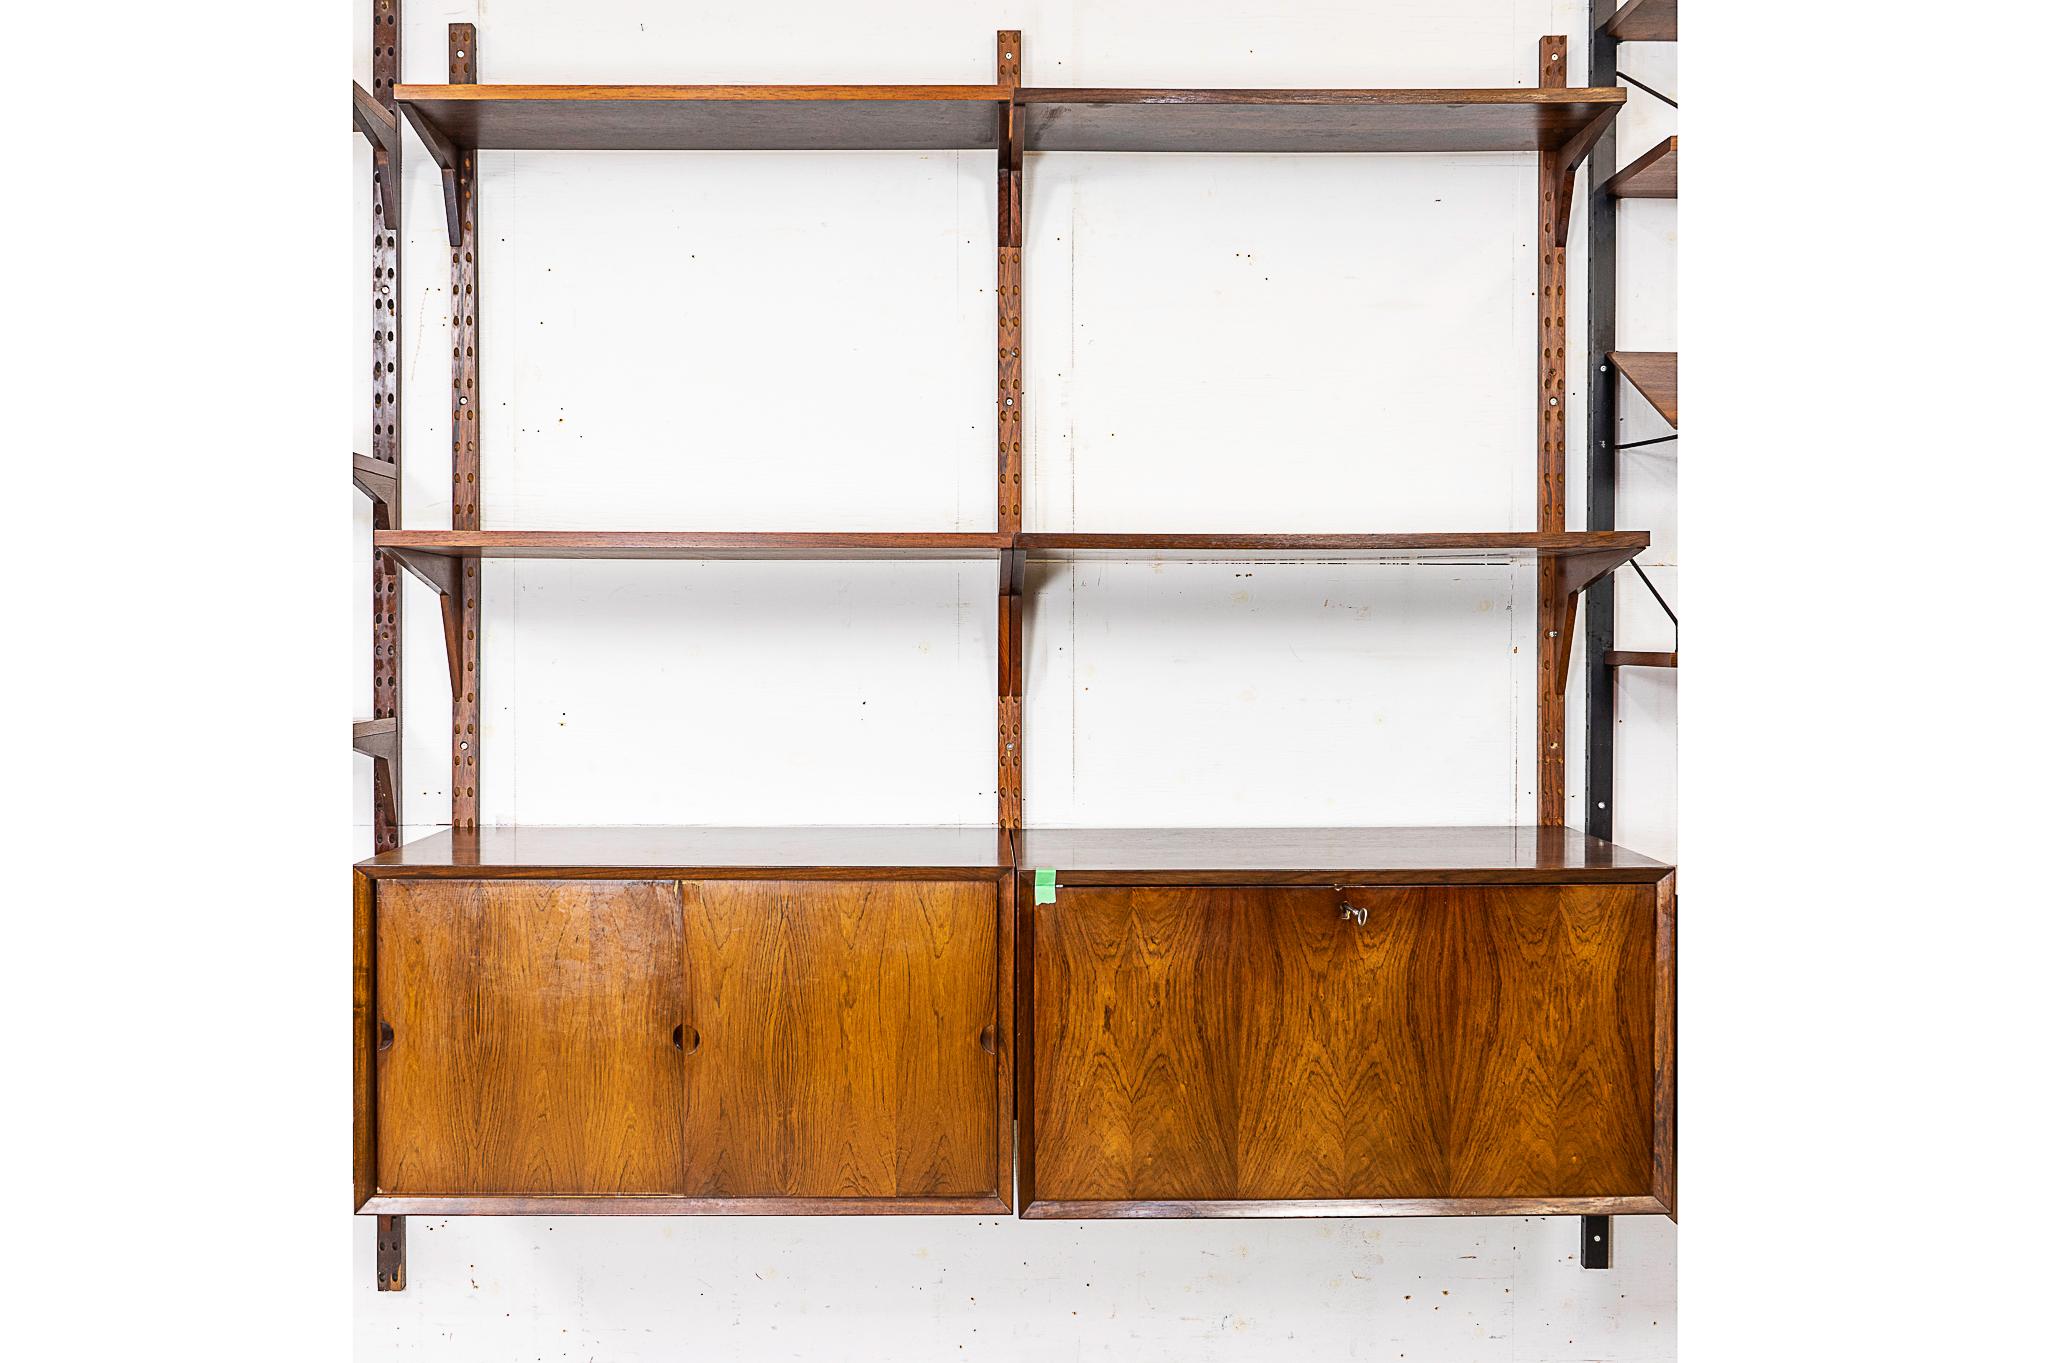 Danish Mid Century rosewood wall system, circa 1960's. Modular cabinetry and shelving make this versatile wall system the perfect solution for home or office use where space is limited but function is a high priority. System includes 4 shelves, a